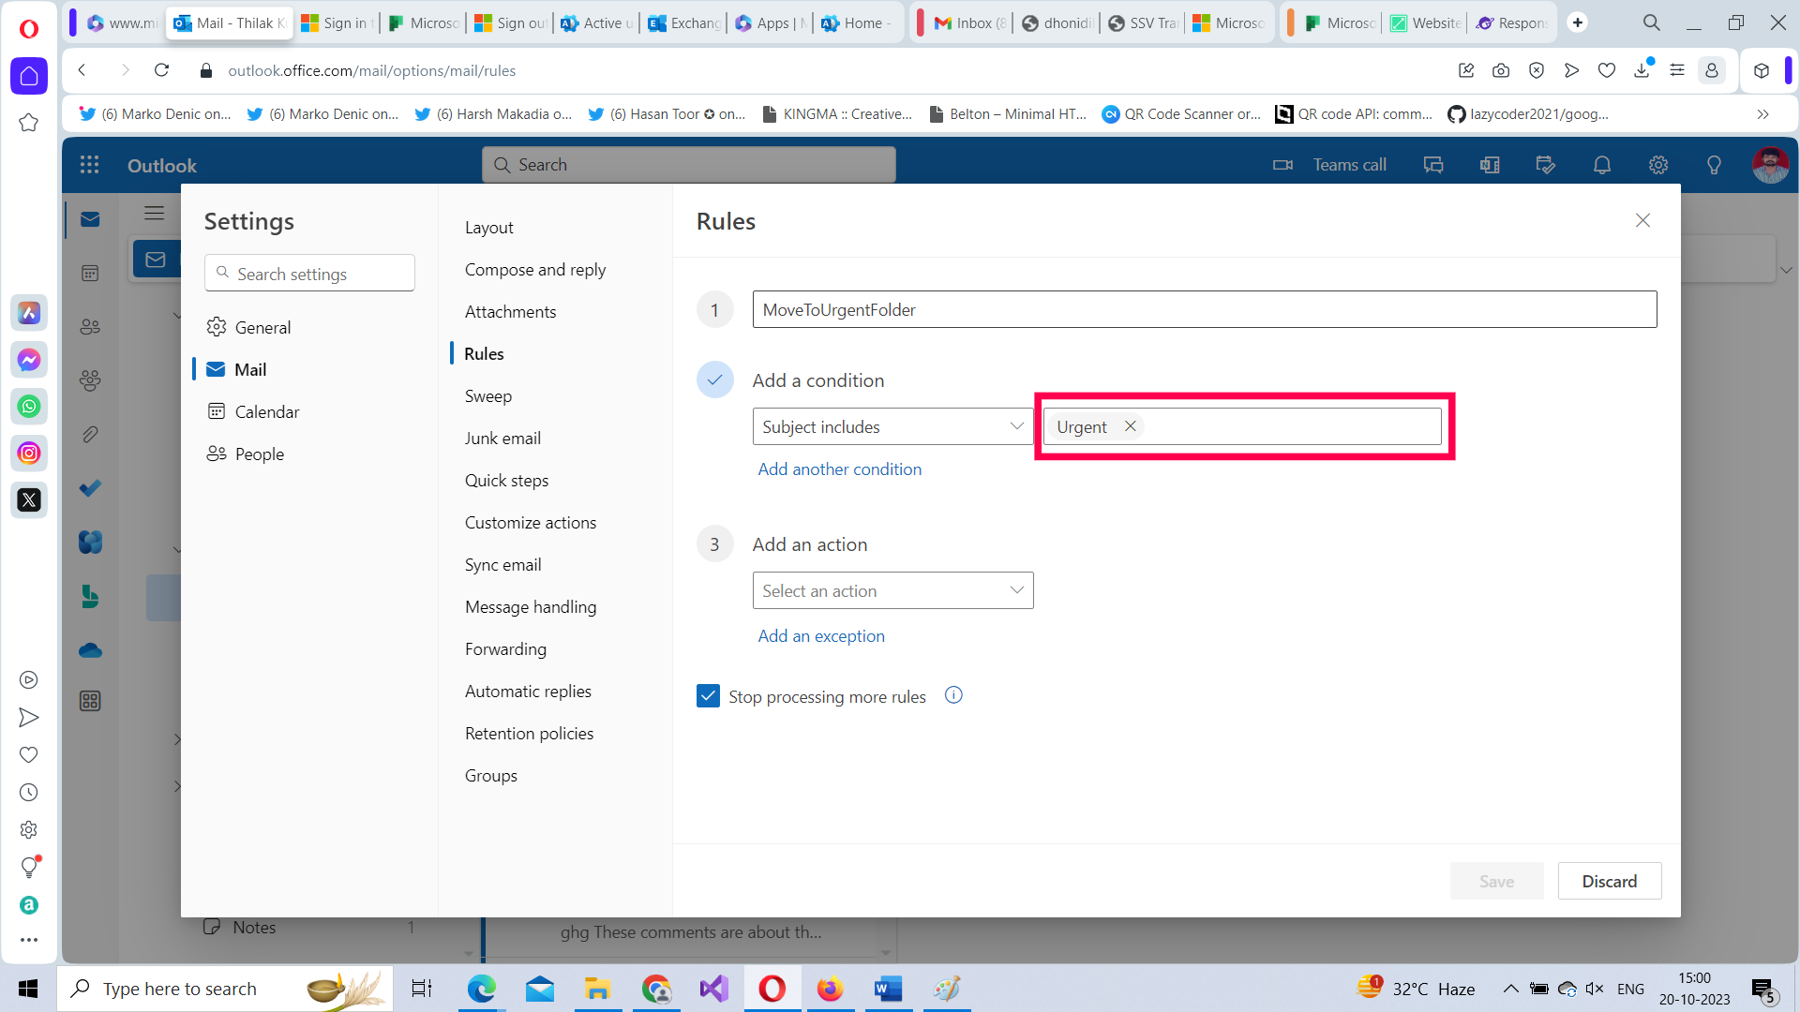 This screenshot shows how you can configure what the subject should include as part of the inbox rule condition in Microsoft 365 Outlook on the web.   